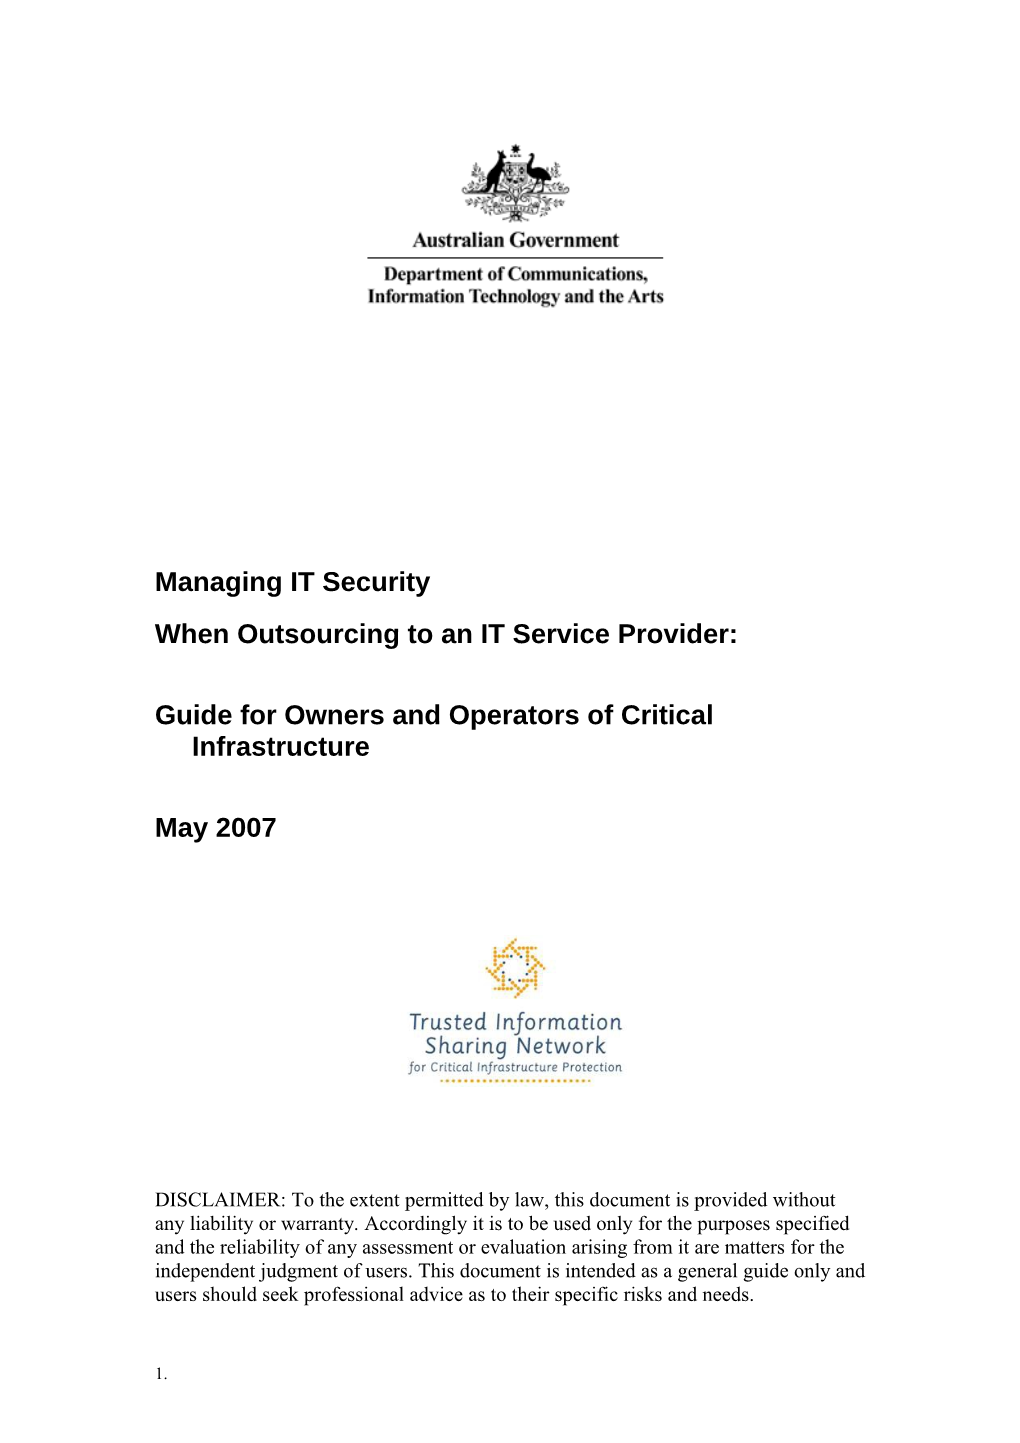 Managing IT Security When Outsourcing to an IT Service Provider Guide for Owners and Operators